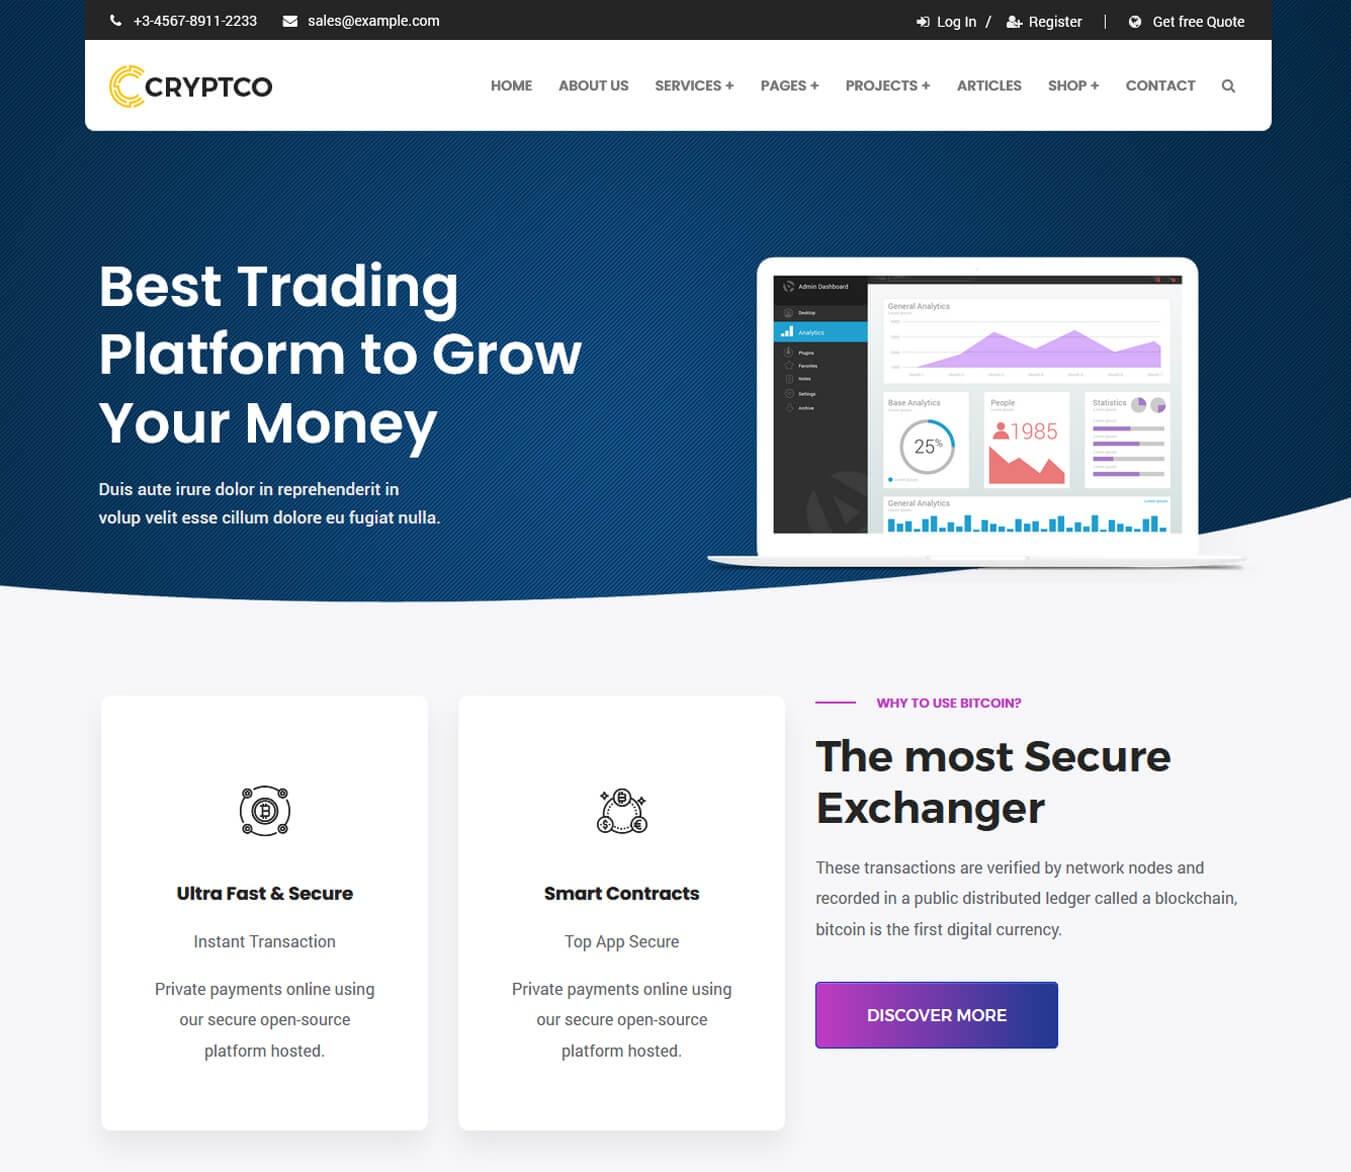 Cryptco - Cryptocurrency & Saas Landing Page WordPress Theme